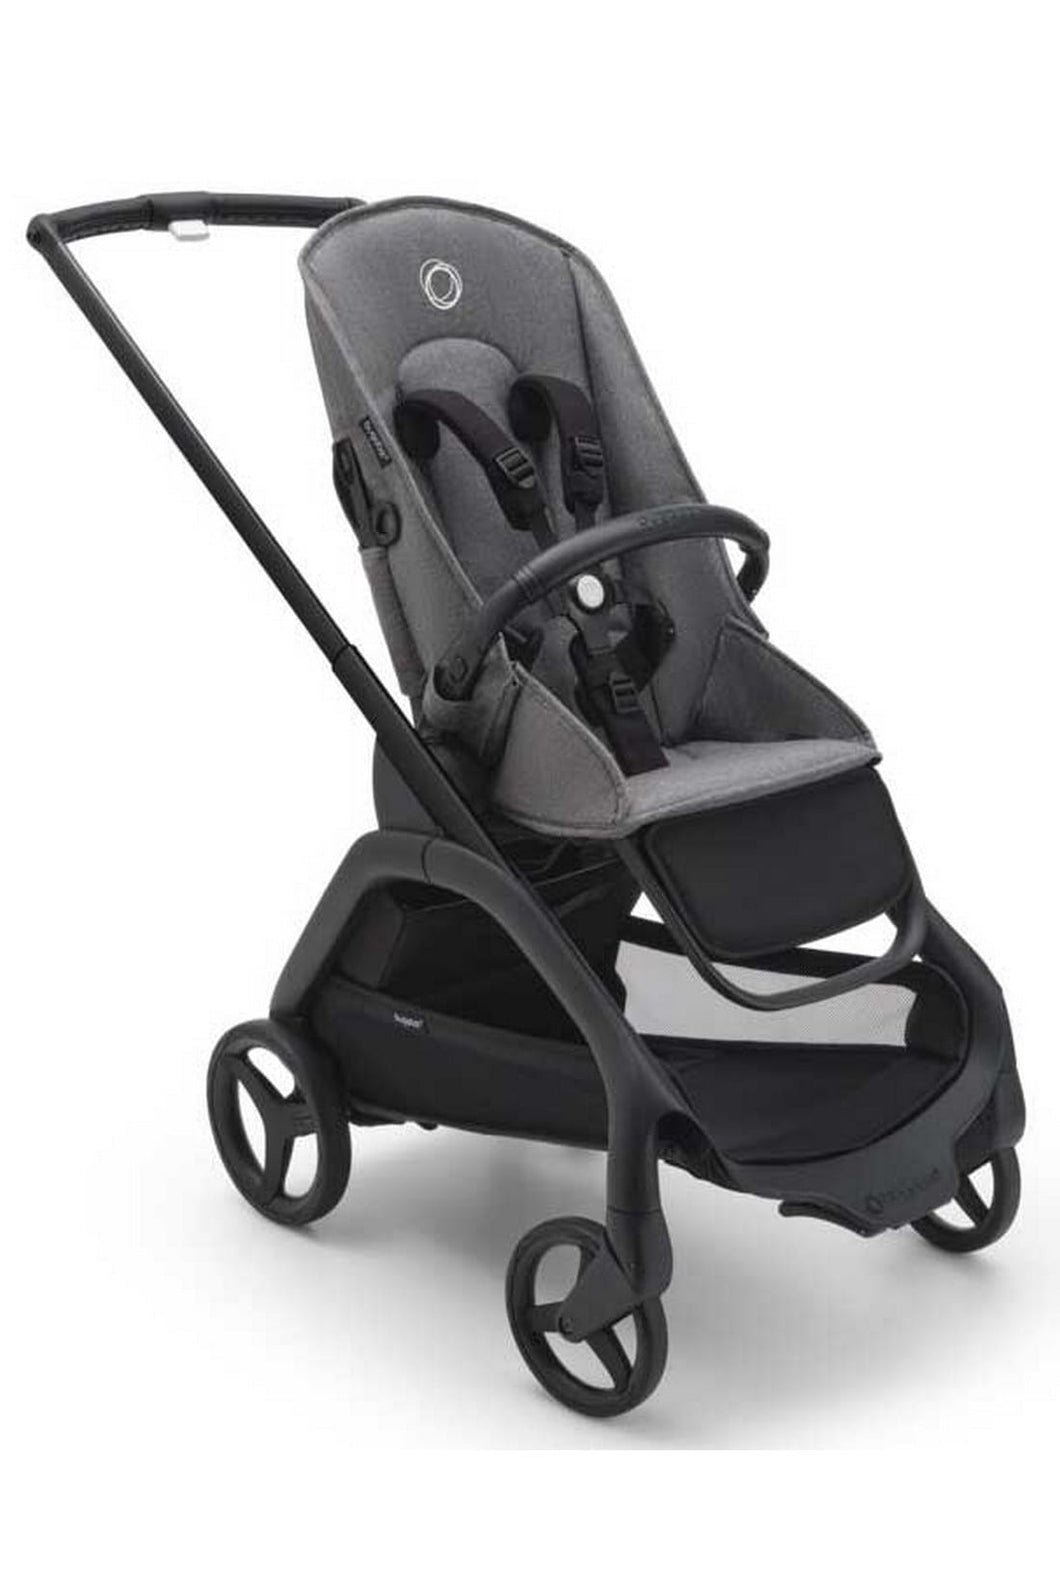 Bugaboo Dragonfly Stroller (Free Cup Holder)